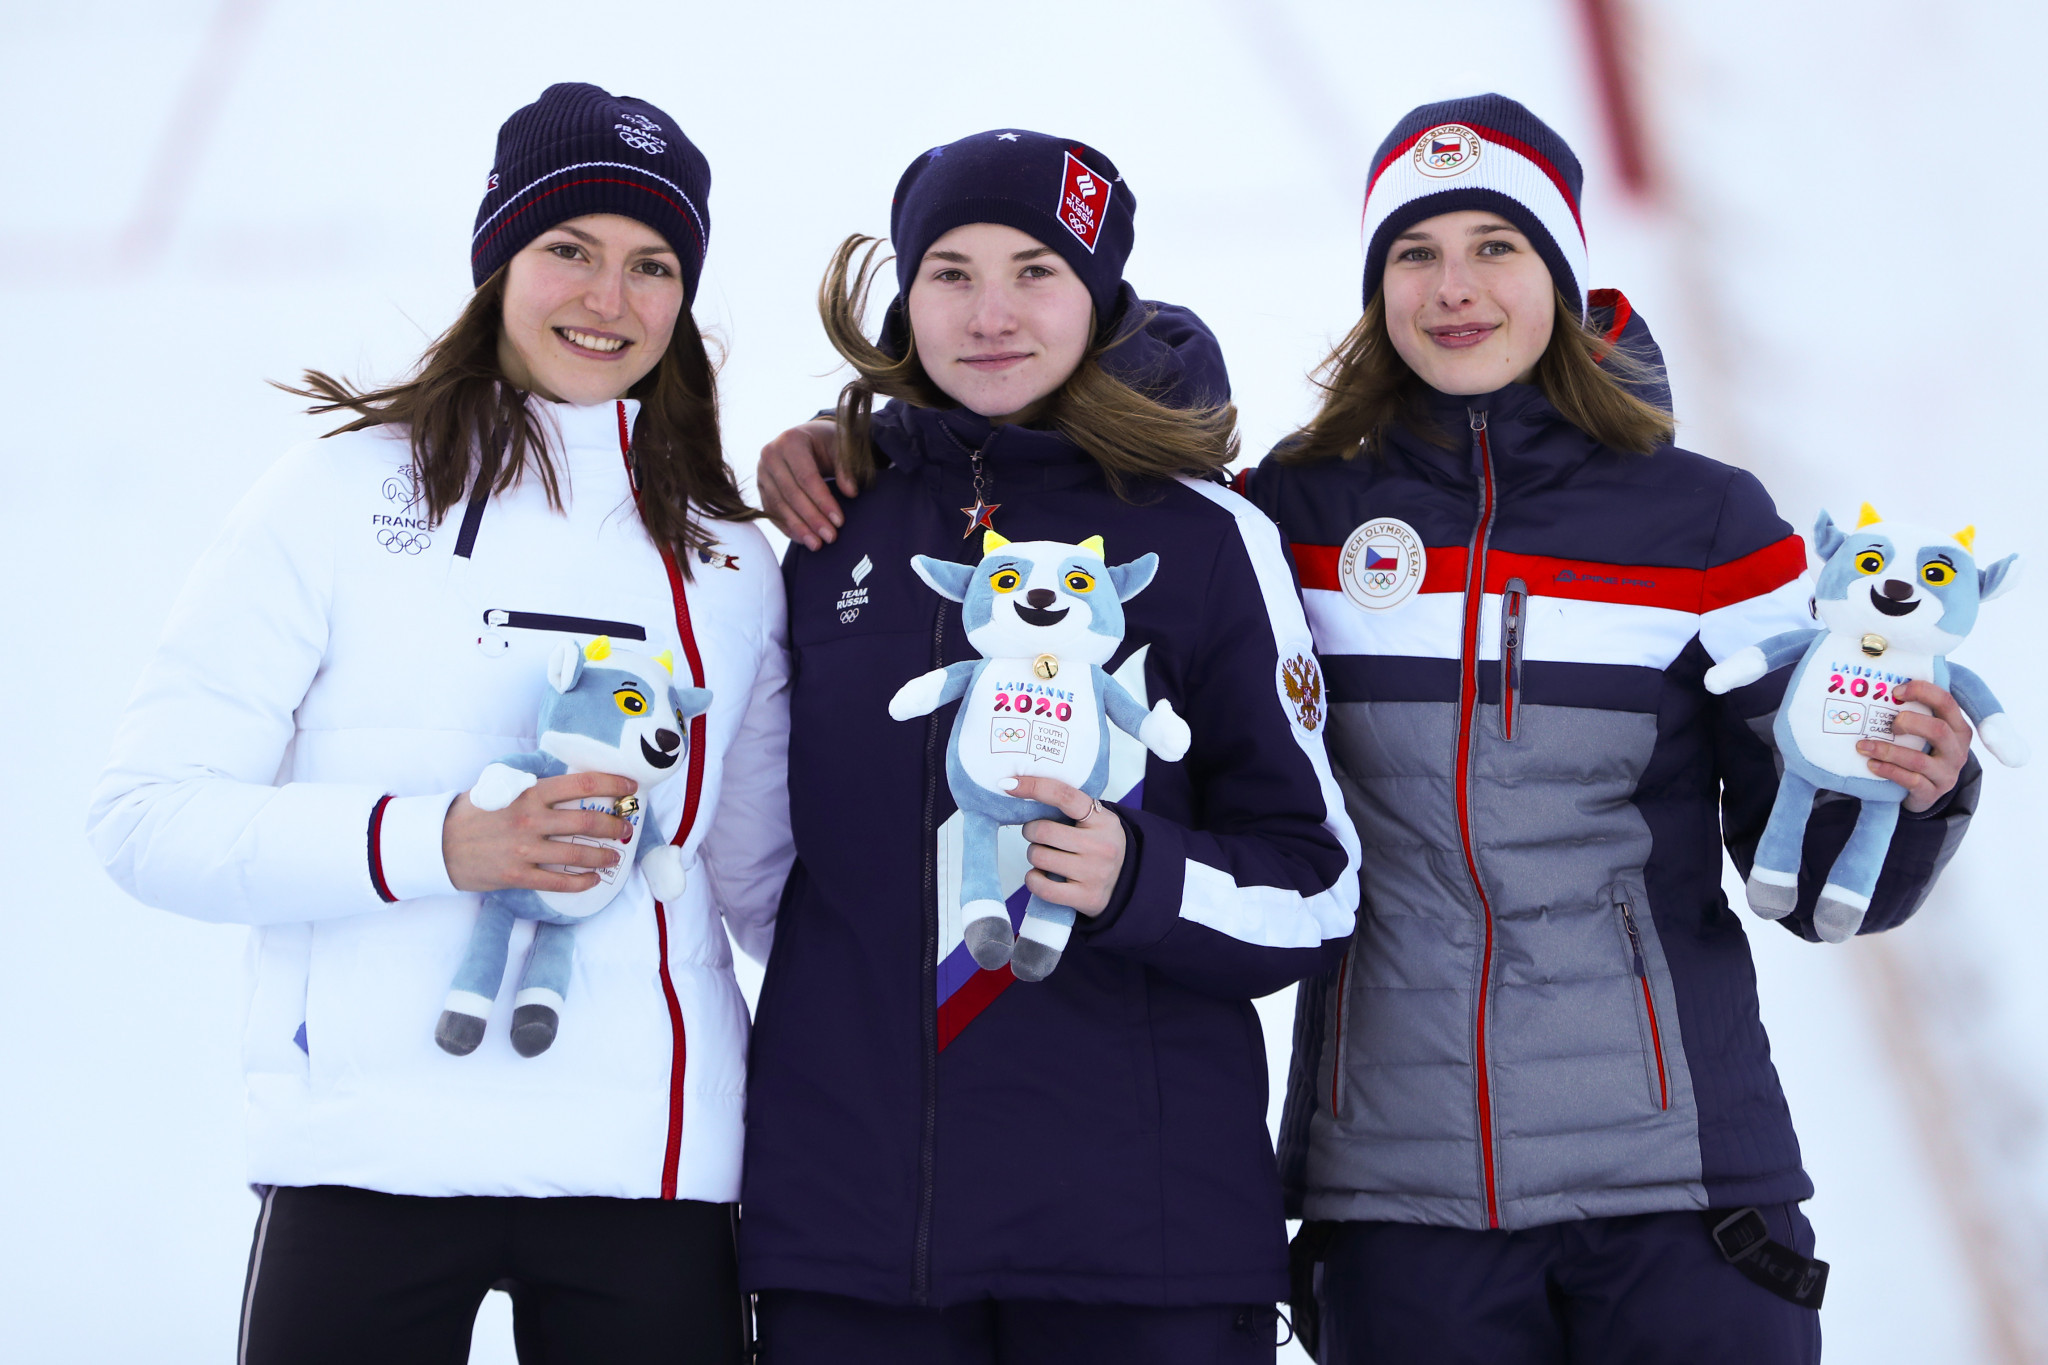 Shpyneva and Woergoetter crowned Lausanne 2020 ski jumping champions